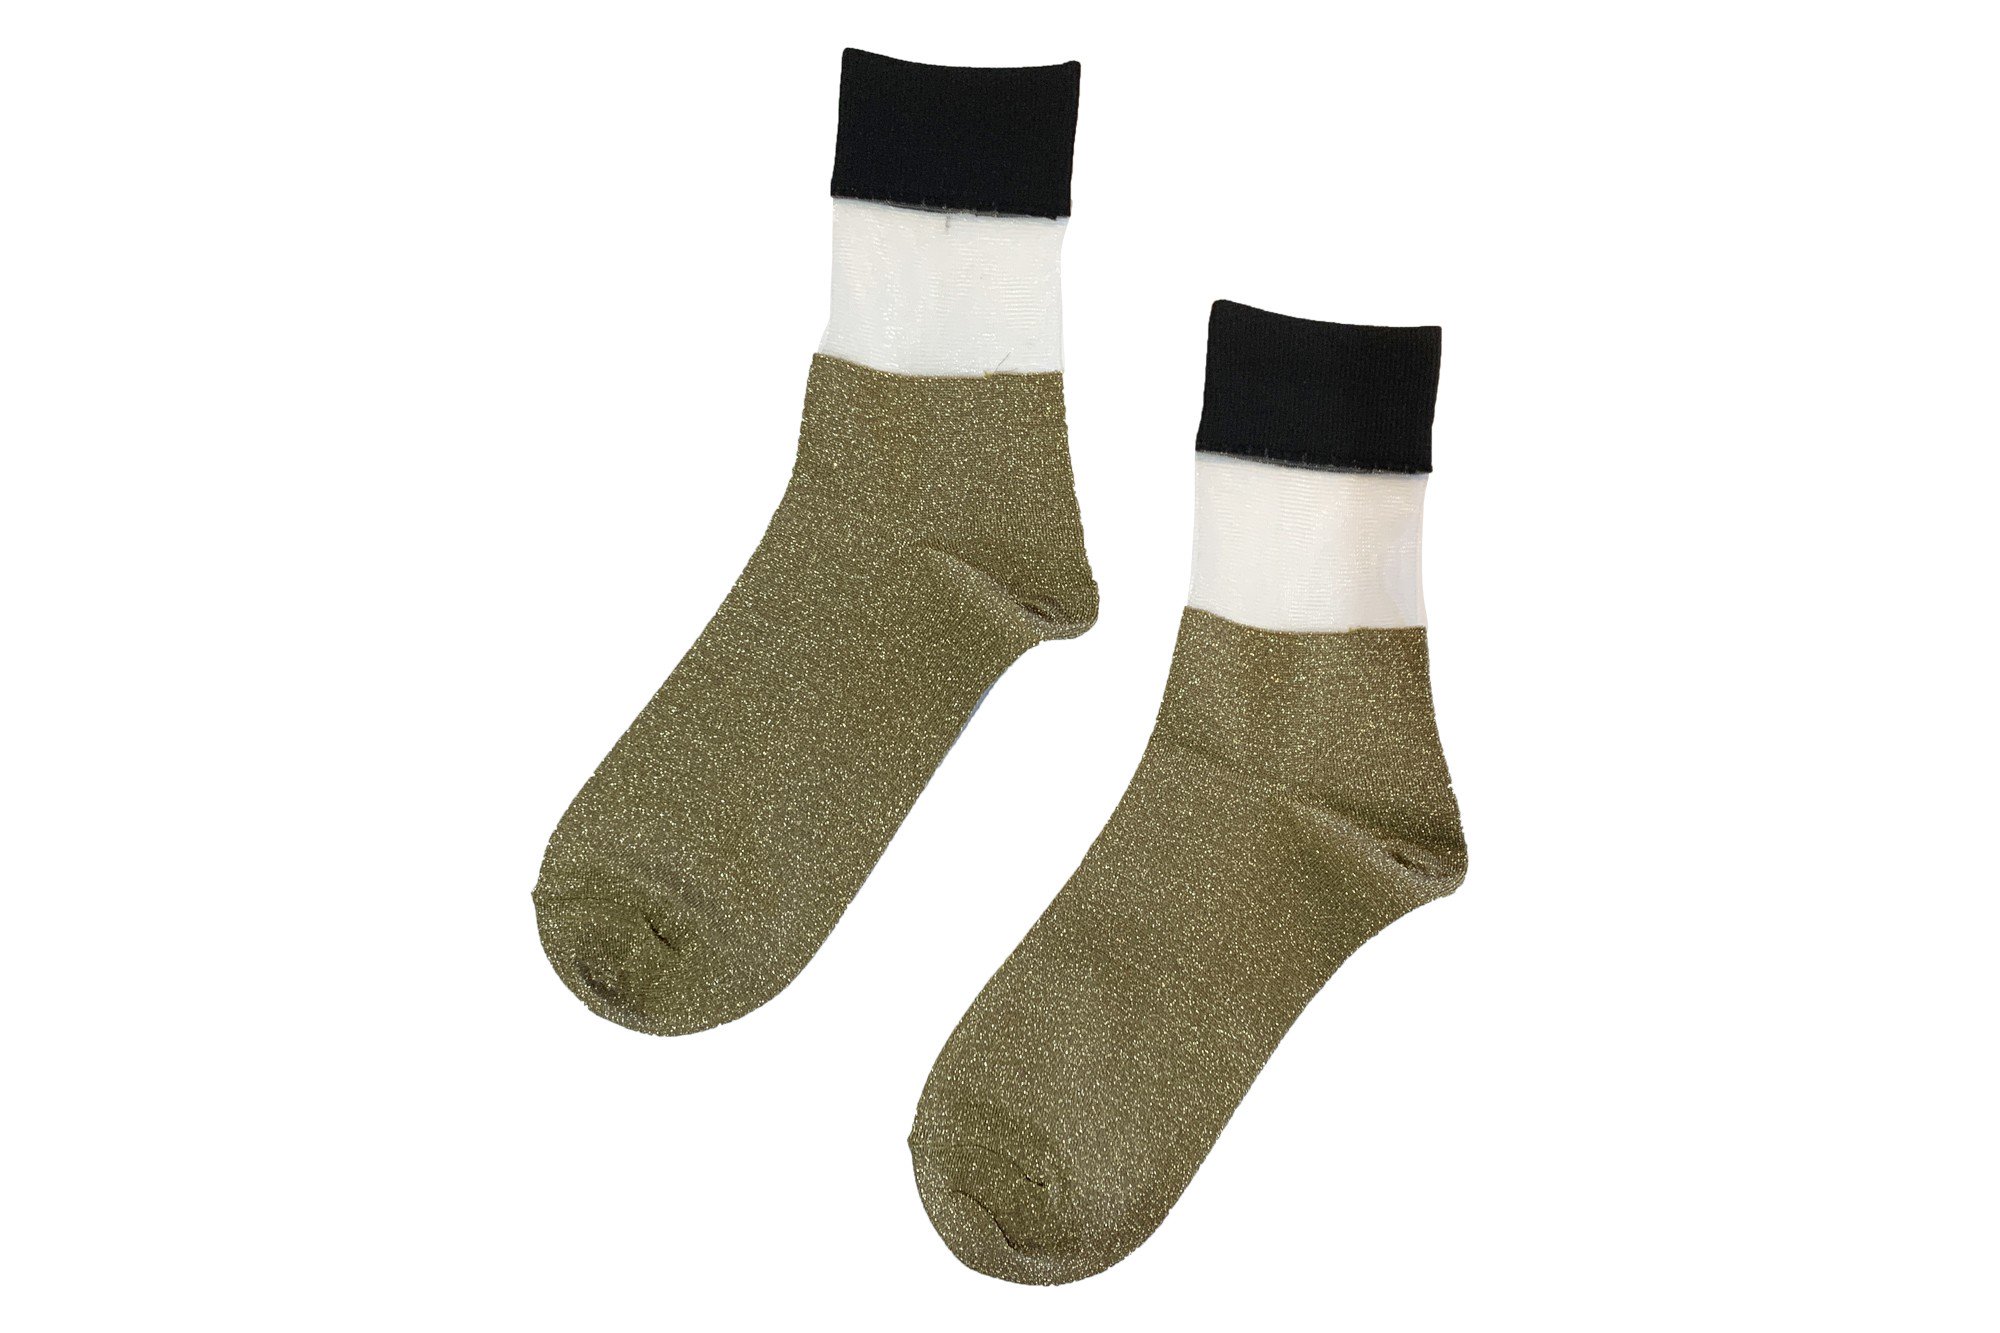 SEE-THROUGH GLITTER SOCKS<br>BLACK×GOLD<img class='new_mark_img2' src='https://img.shop-pro.jp/img/new/icons5.gif' style='border:none;display:inline;margin:0px;padding:0px;width:auto;' />